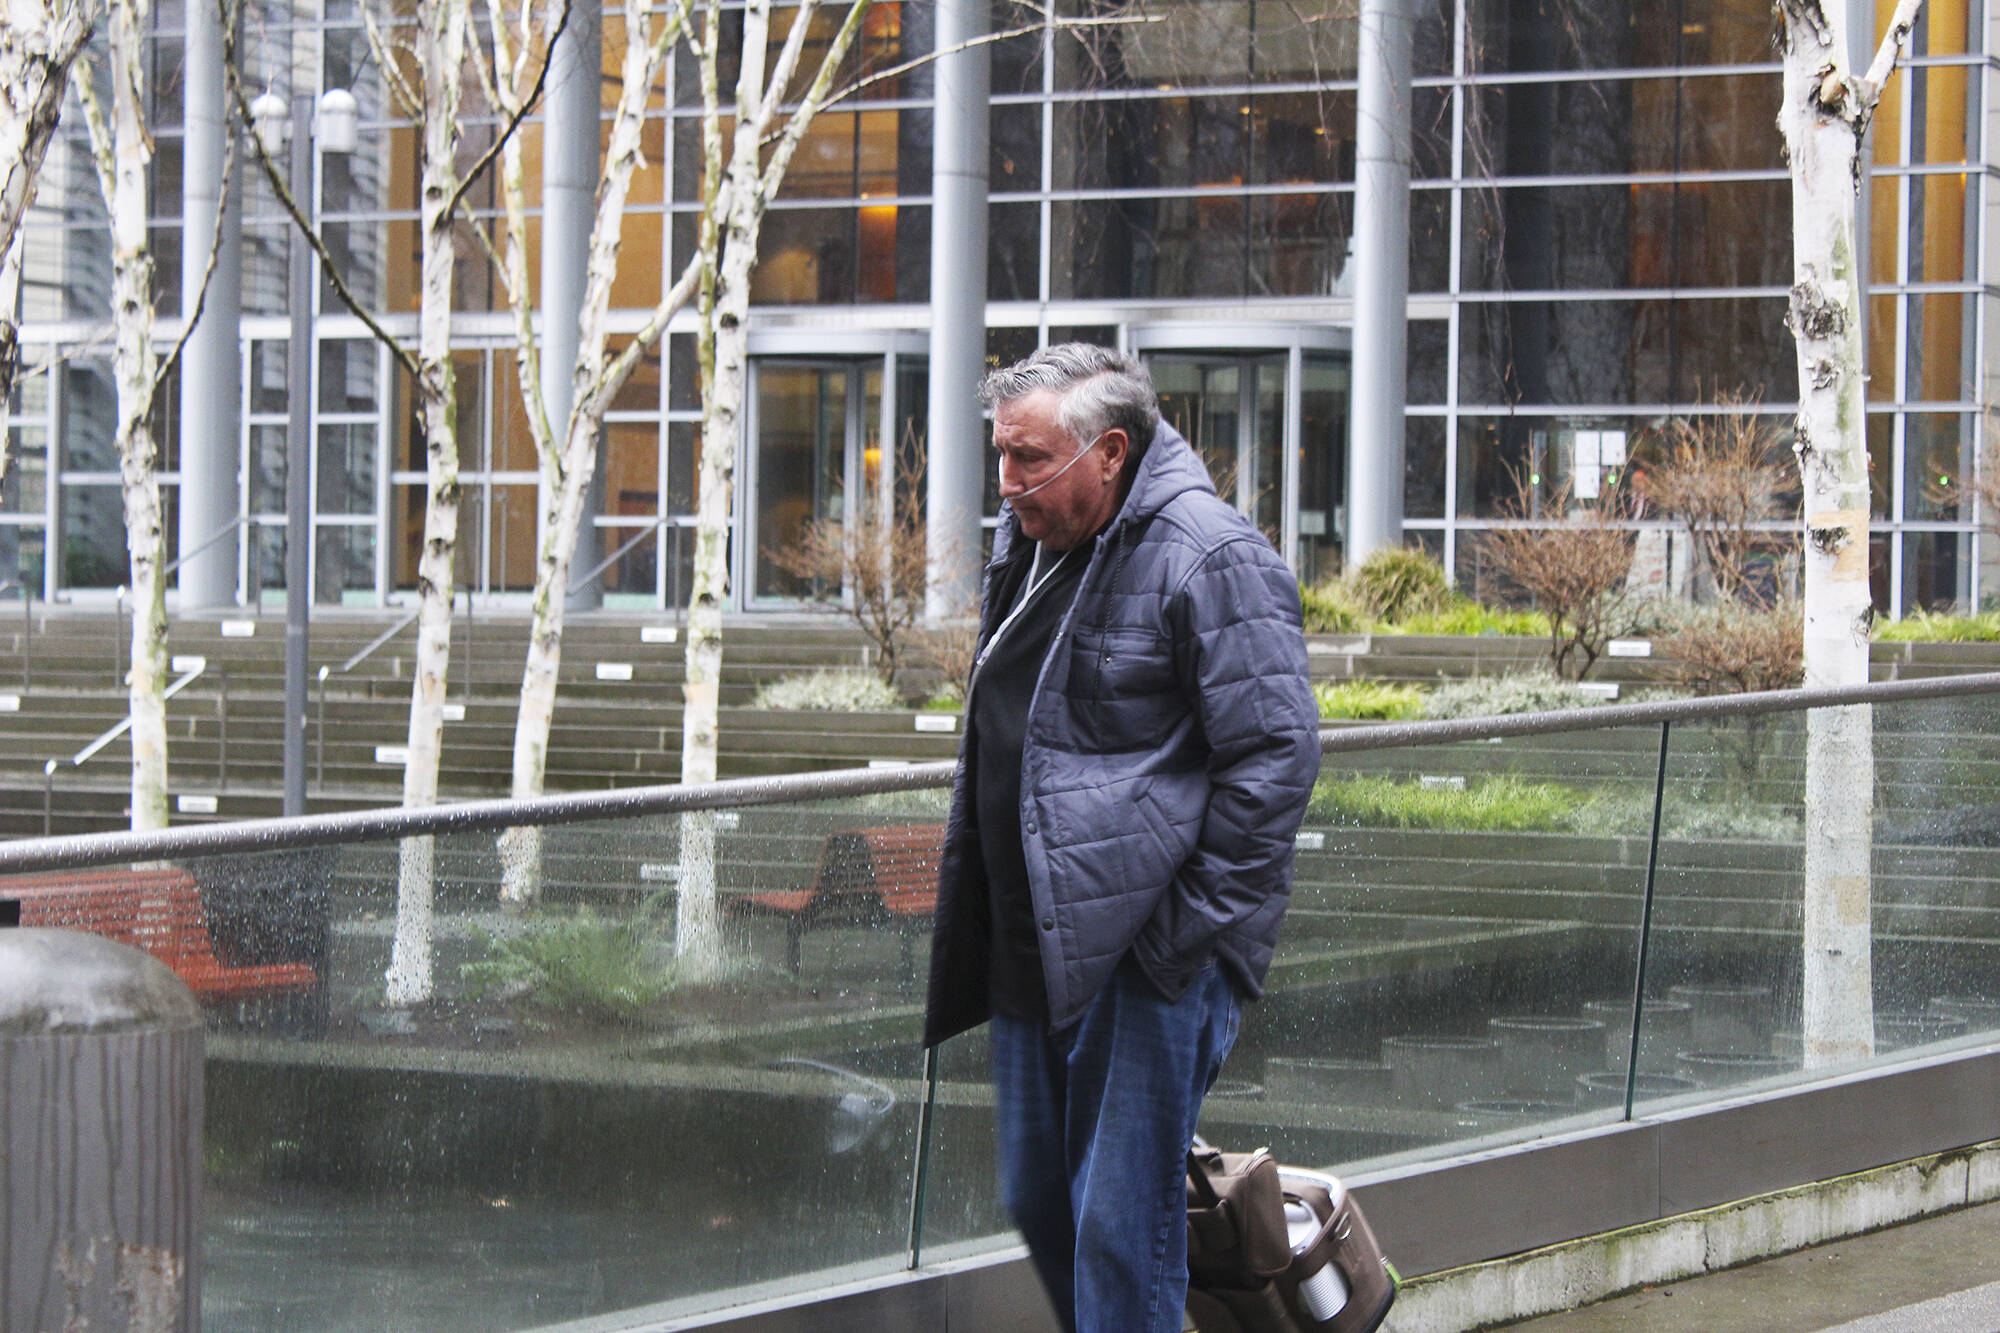 Allan Thomas, former Drainage District 5 commissioner and Enumclaw dairy farmer, walks away from the Western District of Washington federal courthouse in Seattle. He was sentenced Feb. 3 to 2.5 years in prison for his part in stealing more than $460,000 in taxes from locals. Photo by Ray Miller-Still, Sound Publishing